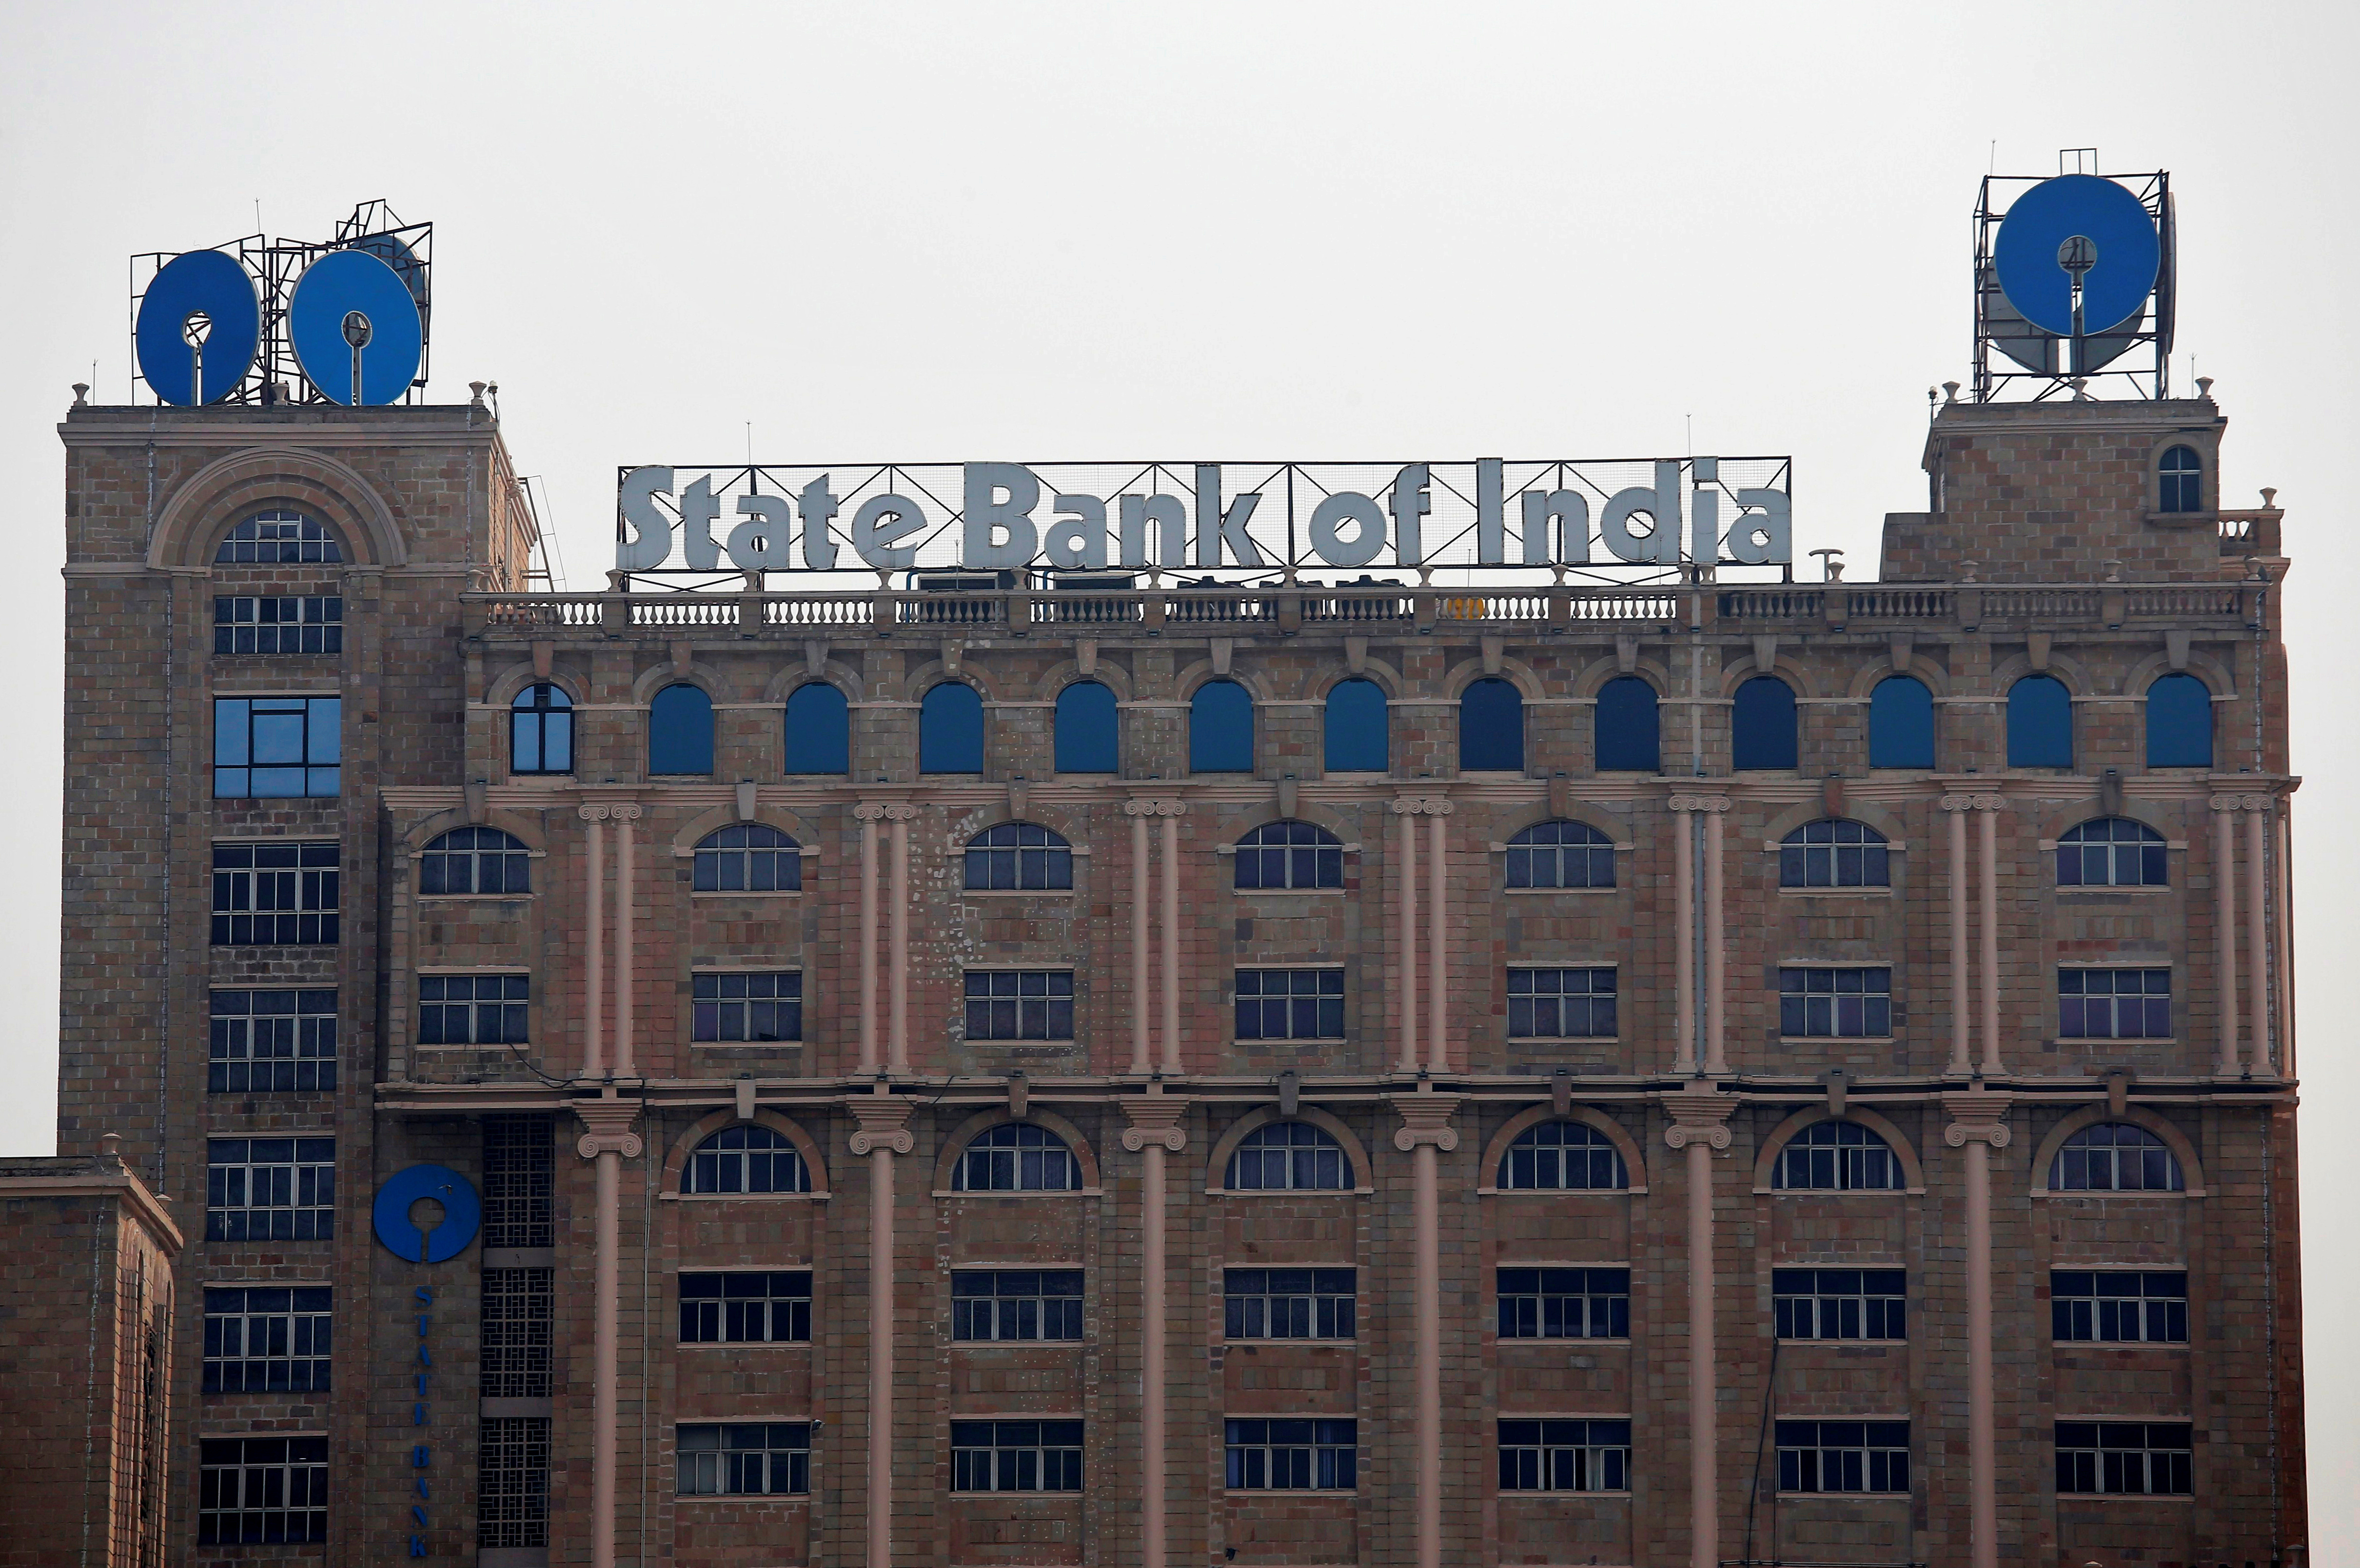 The State Bank of India (SBI) office building is pictured in Kolkata